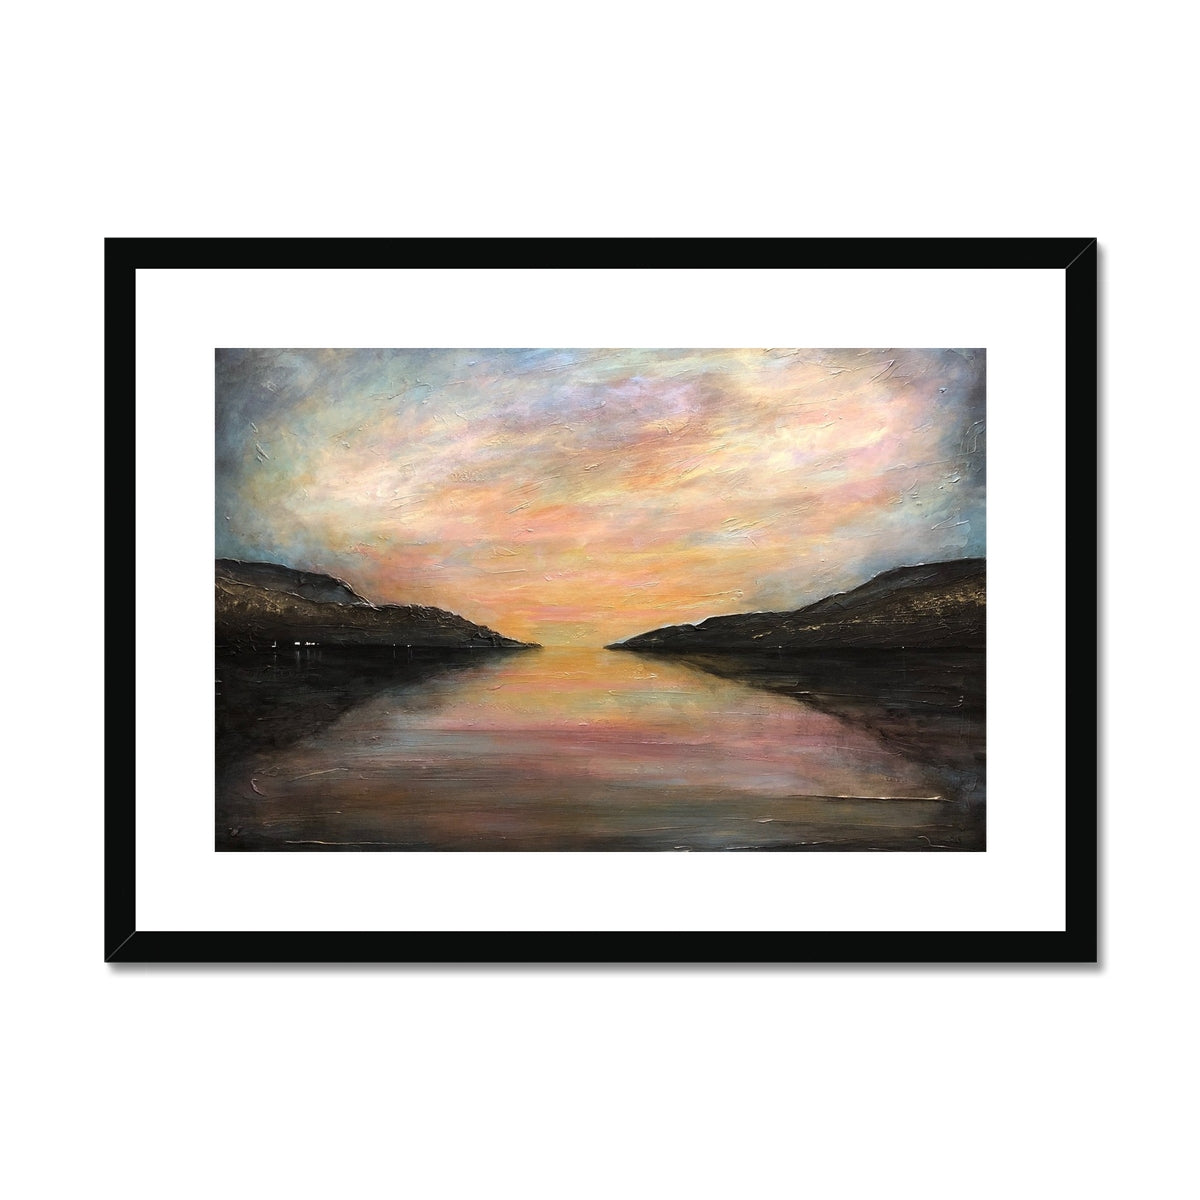 Loch Ness Glow Painting | Framed & Mounted Prints From Scotland-Framed & Mounted Prints-Scottish Lochs & Mountains Art Gallery-A2 Landscape-Black Frame-Paintings, Prints, Homeware, Art Gifts From Scotland By Scottish Artist Kevin Hunter